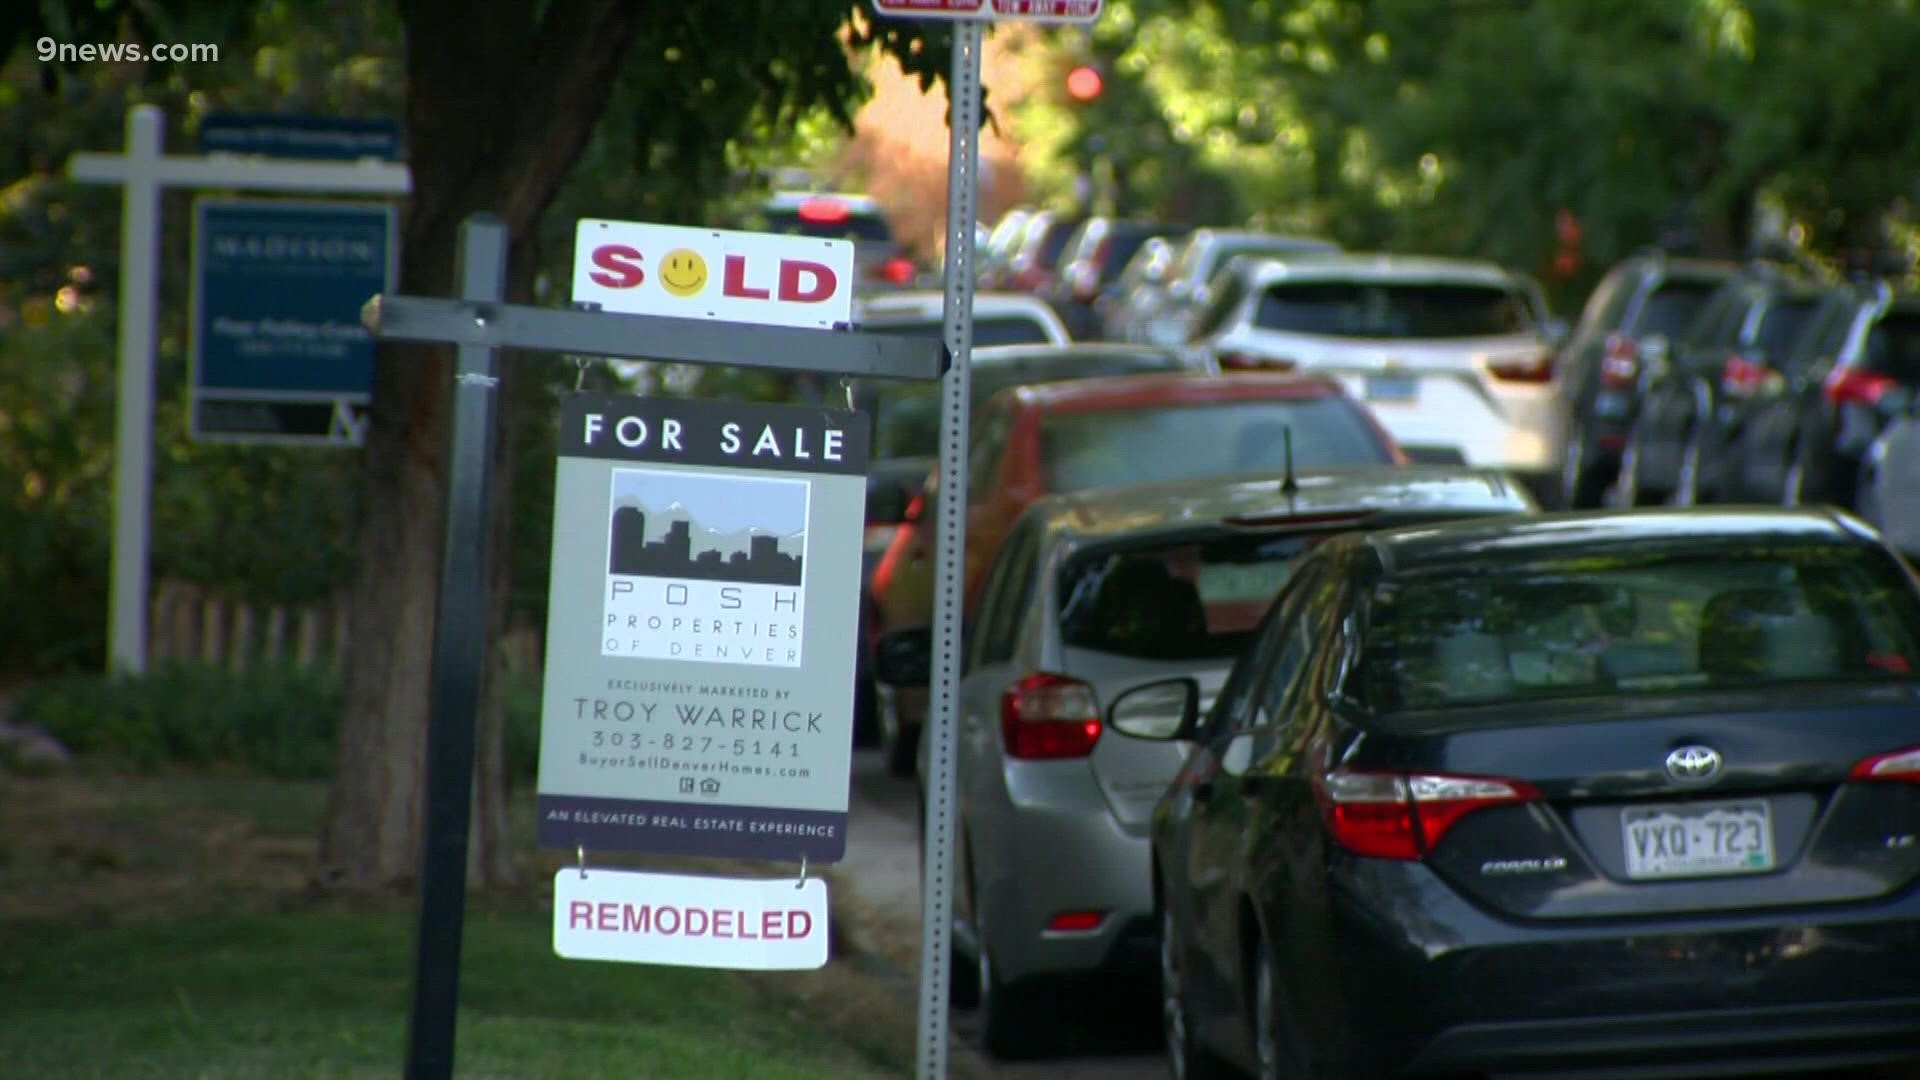 Denver's record setting real estate market may be heading for a repeat performance in 2022.